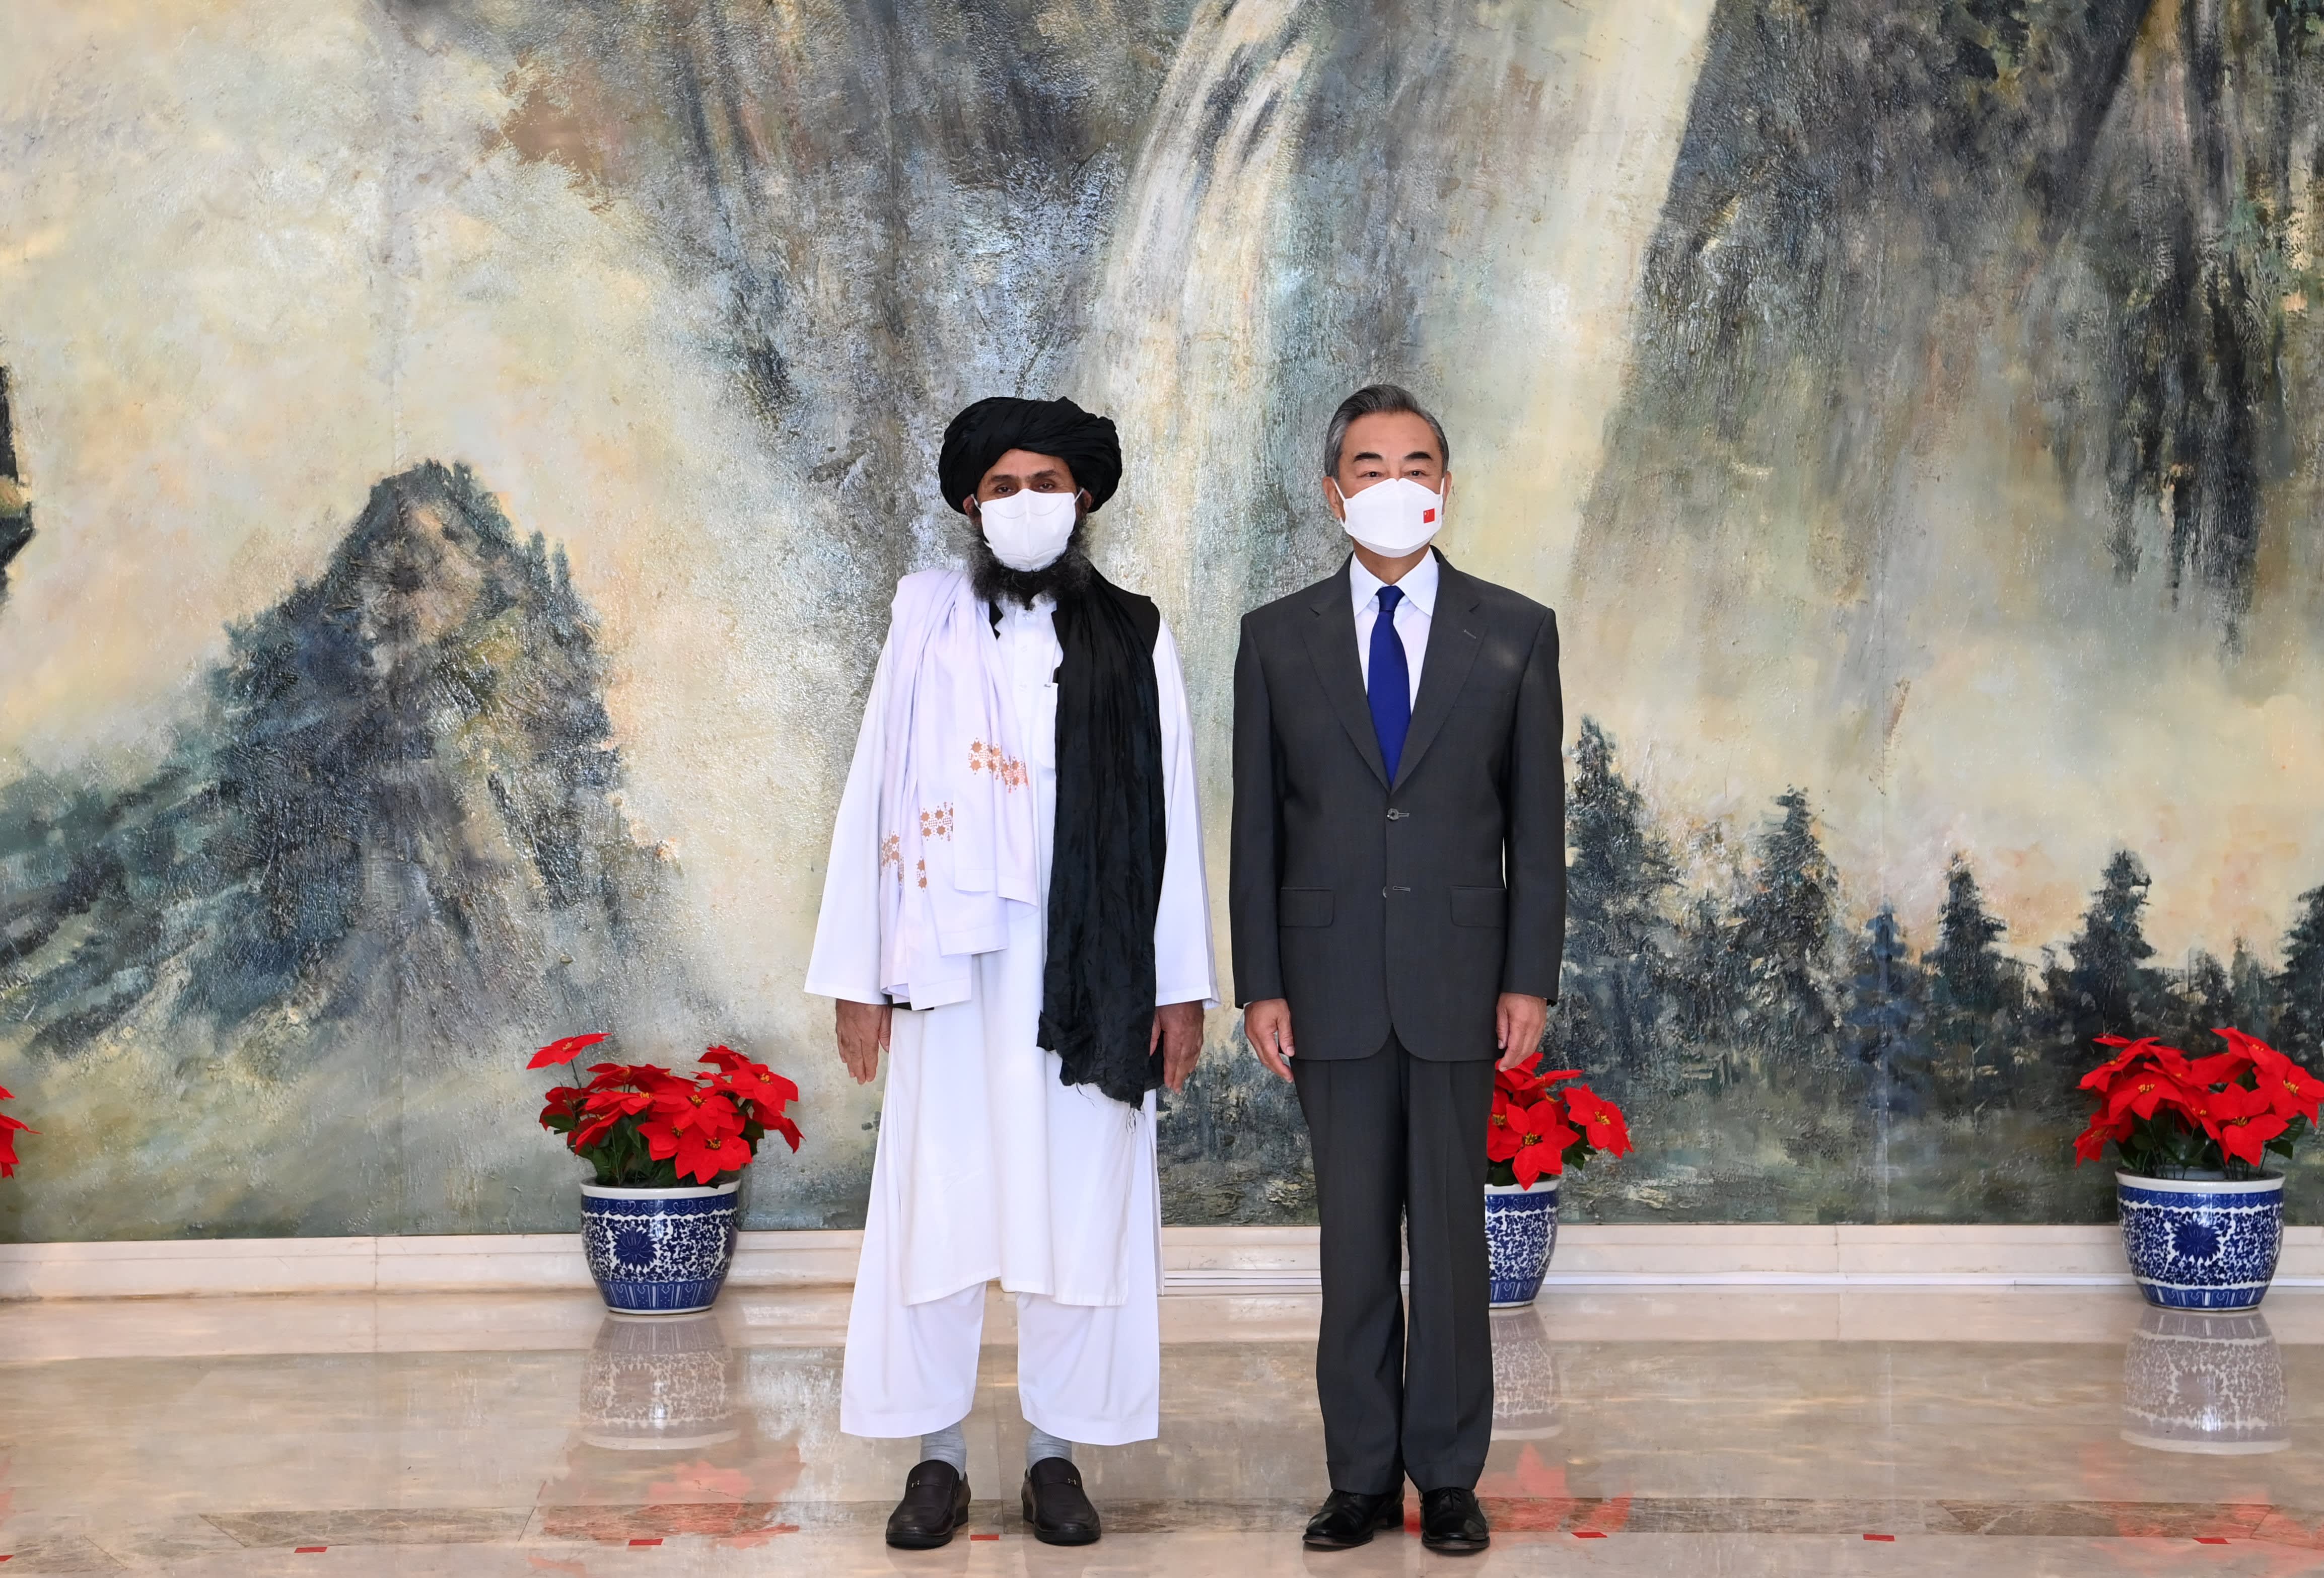 'Hedging their bets': Political experts weigh in on China's growing relations with the Taliban